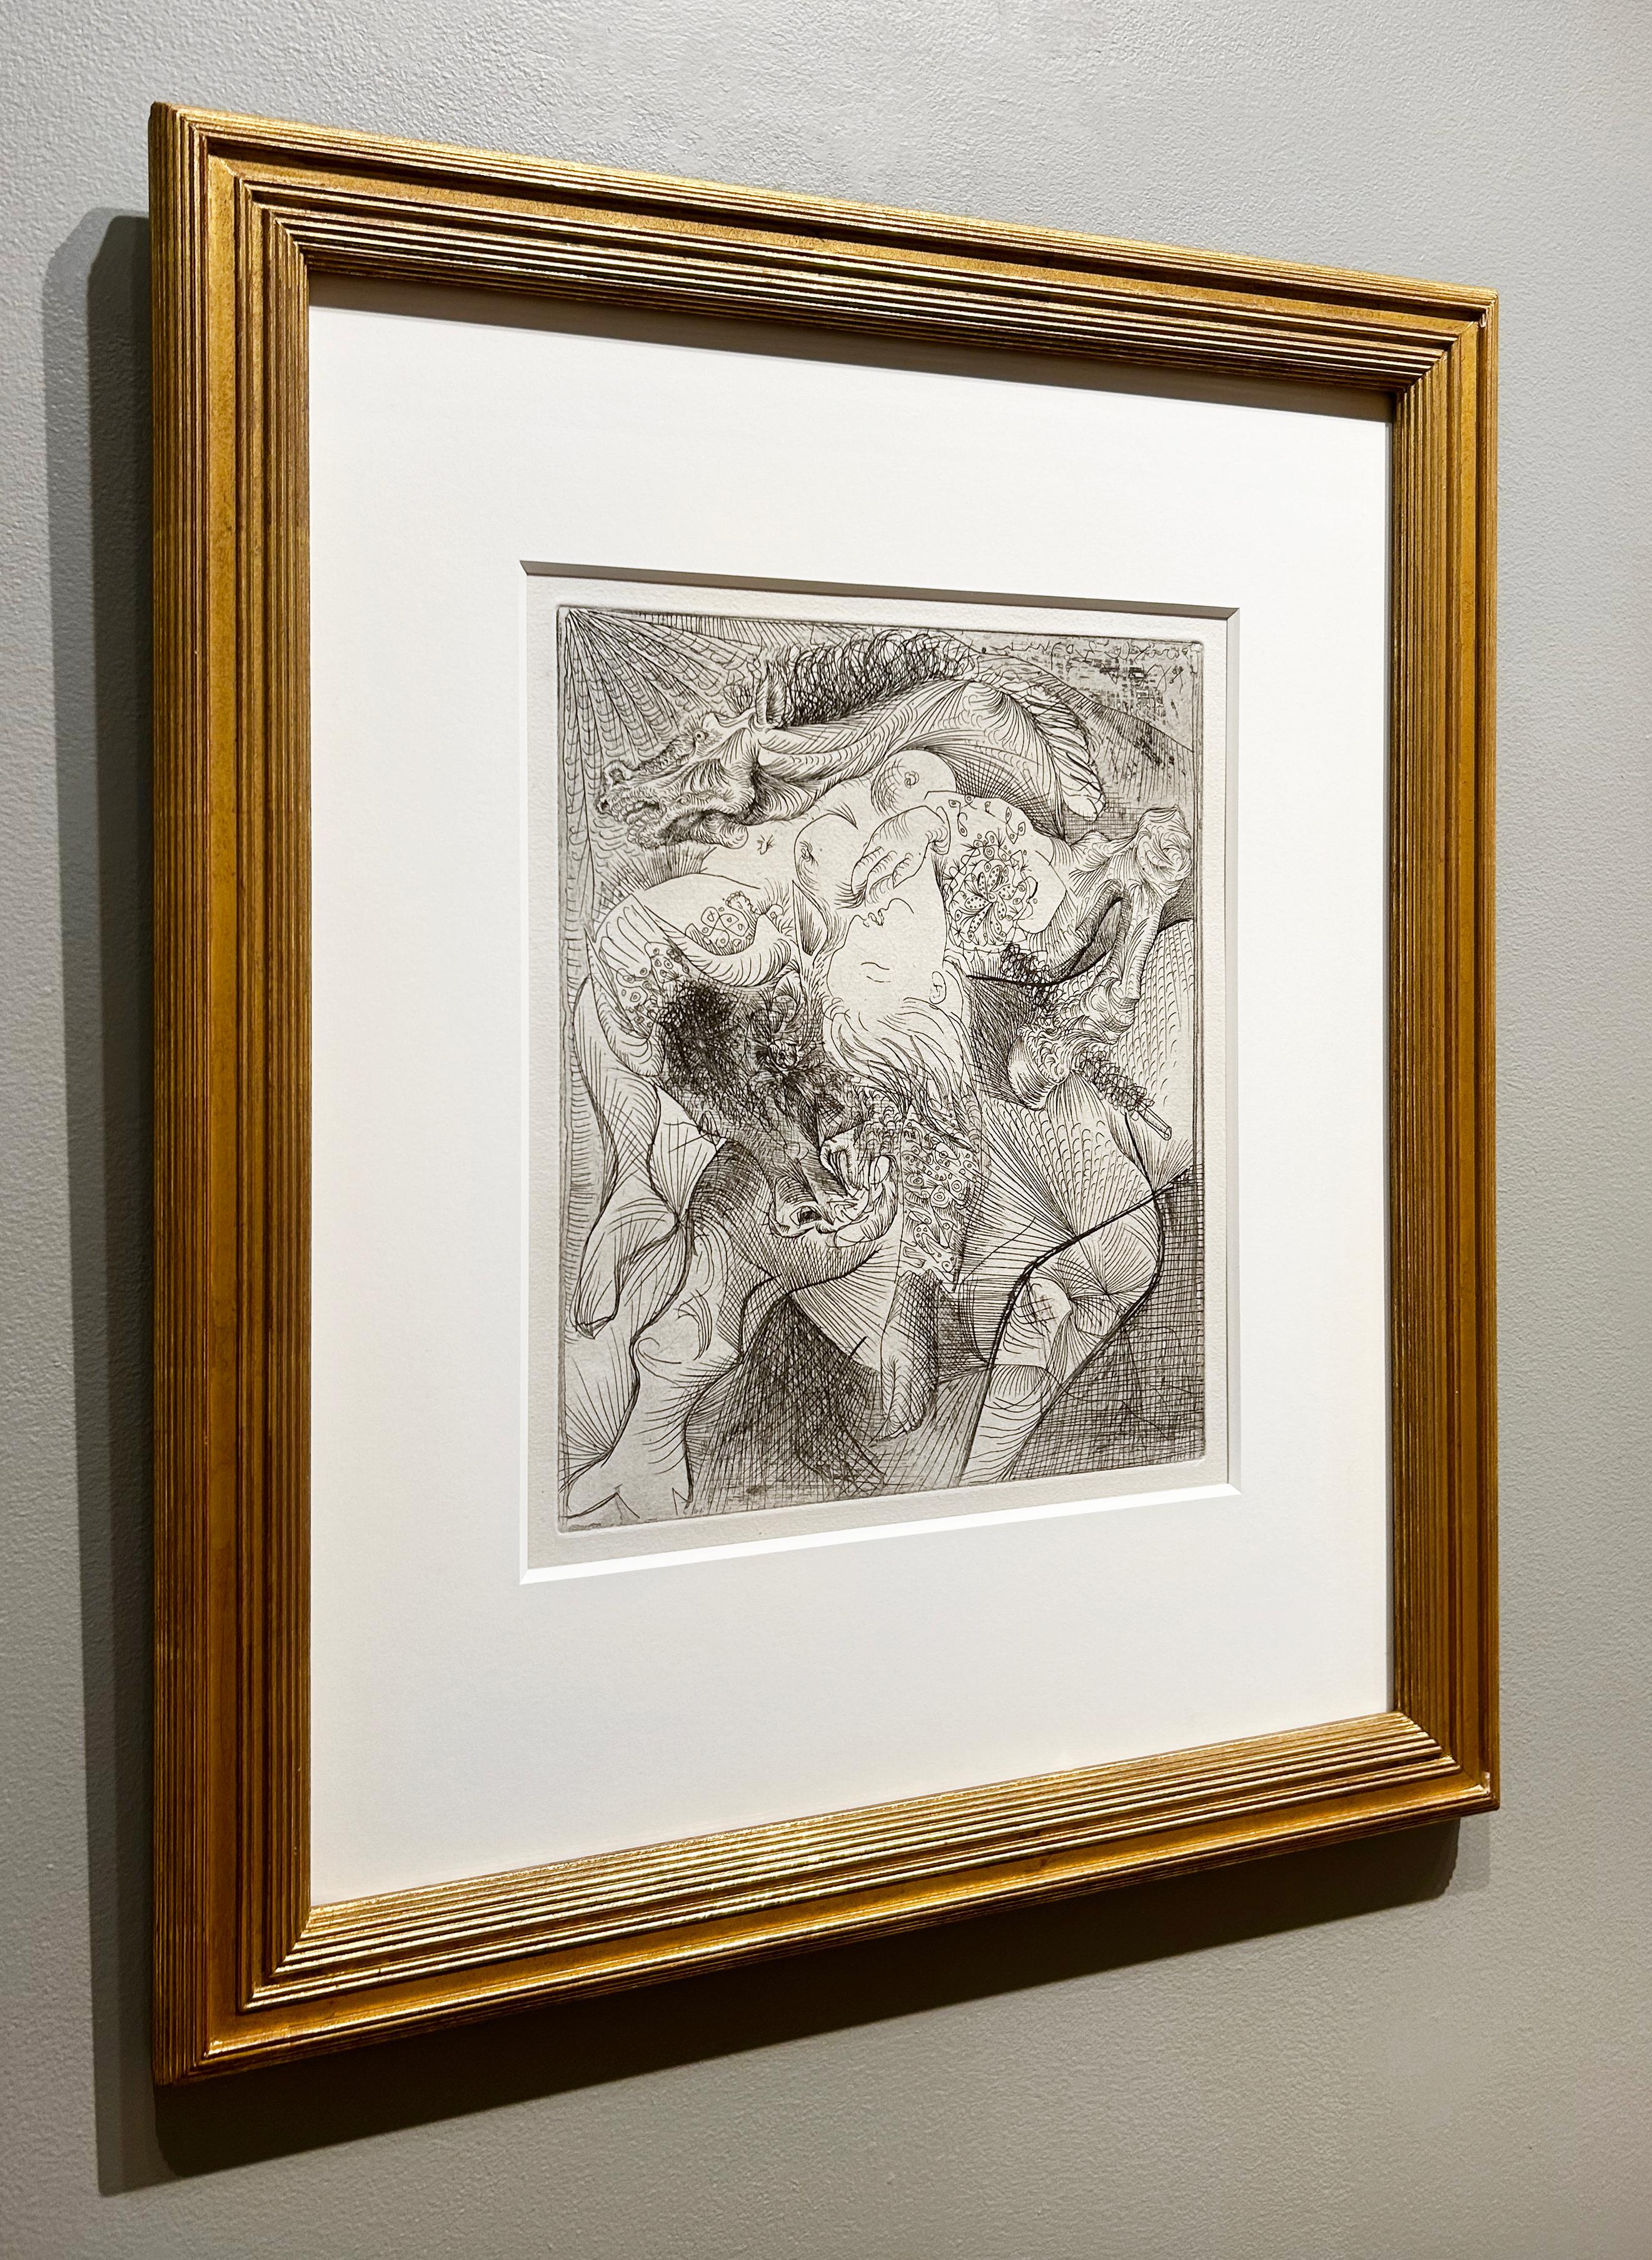 Artist:  Picasso, Pablo
Title:  Marie-Therese en Femme Torero 
Series:  Vollard
Date:  June 20, 1934, printed and published 1939
Medium:  Etching printed on Montval laid paper
Unframed Dimensions:  17.5